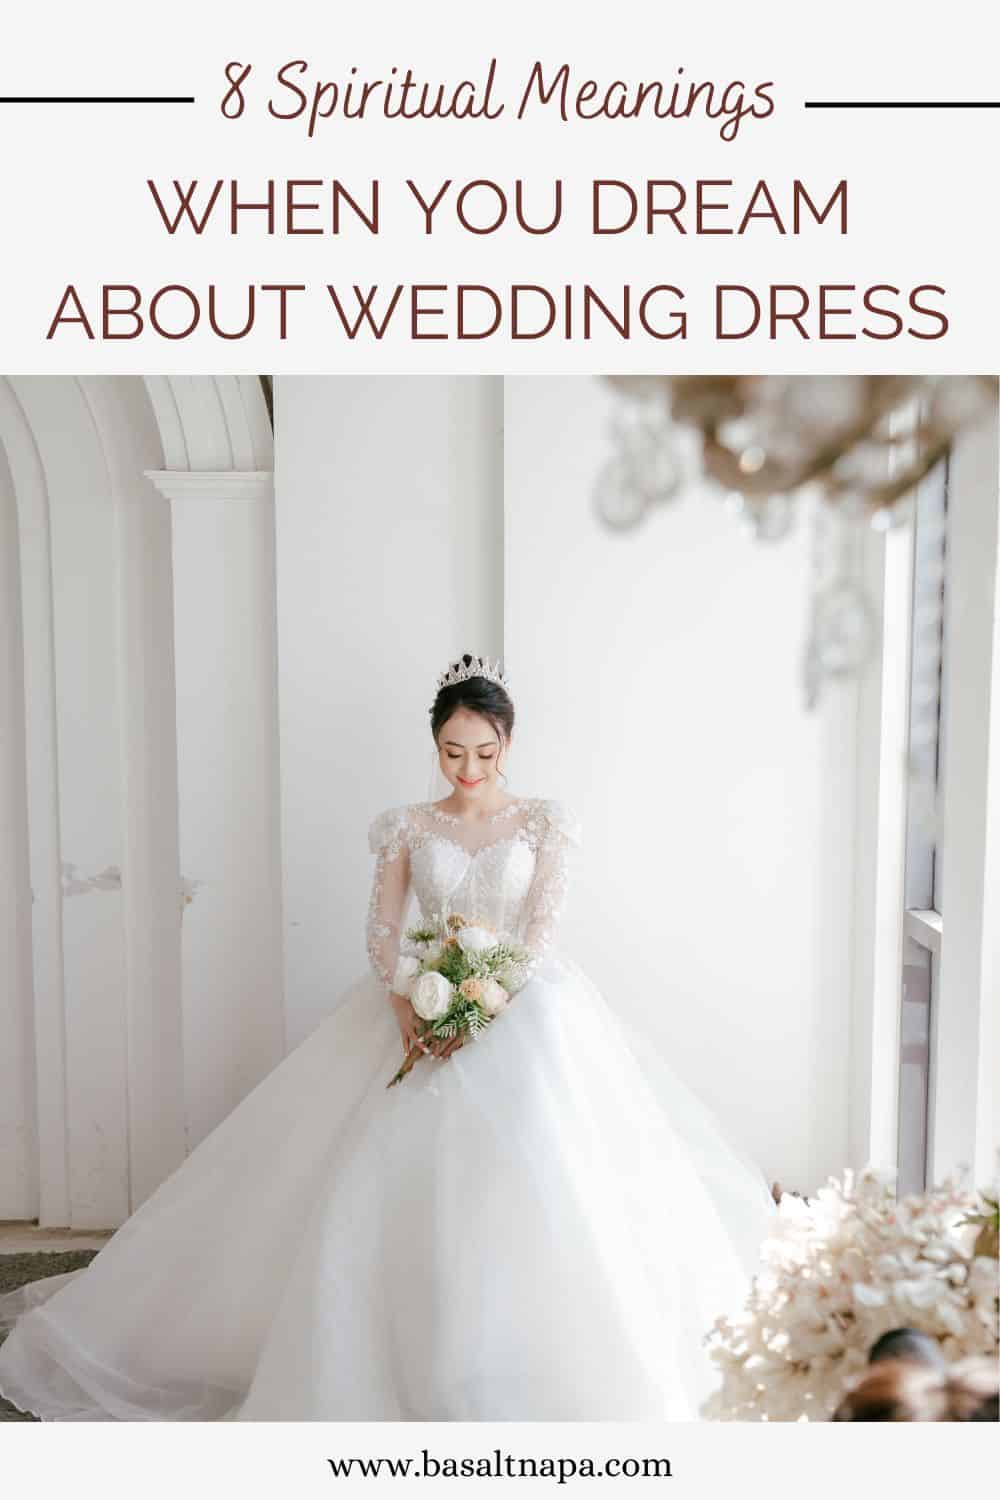 Dream about wedding dress meanings